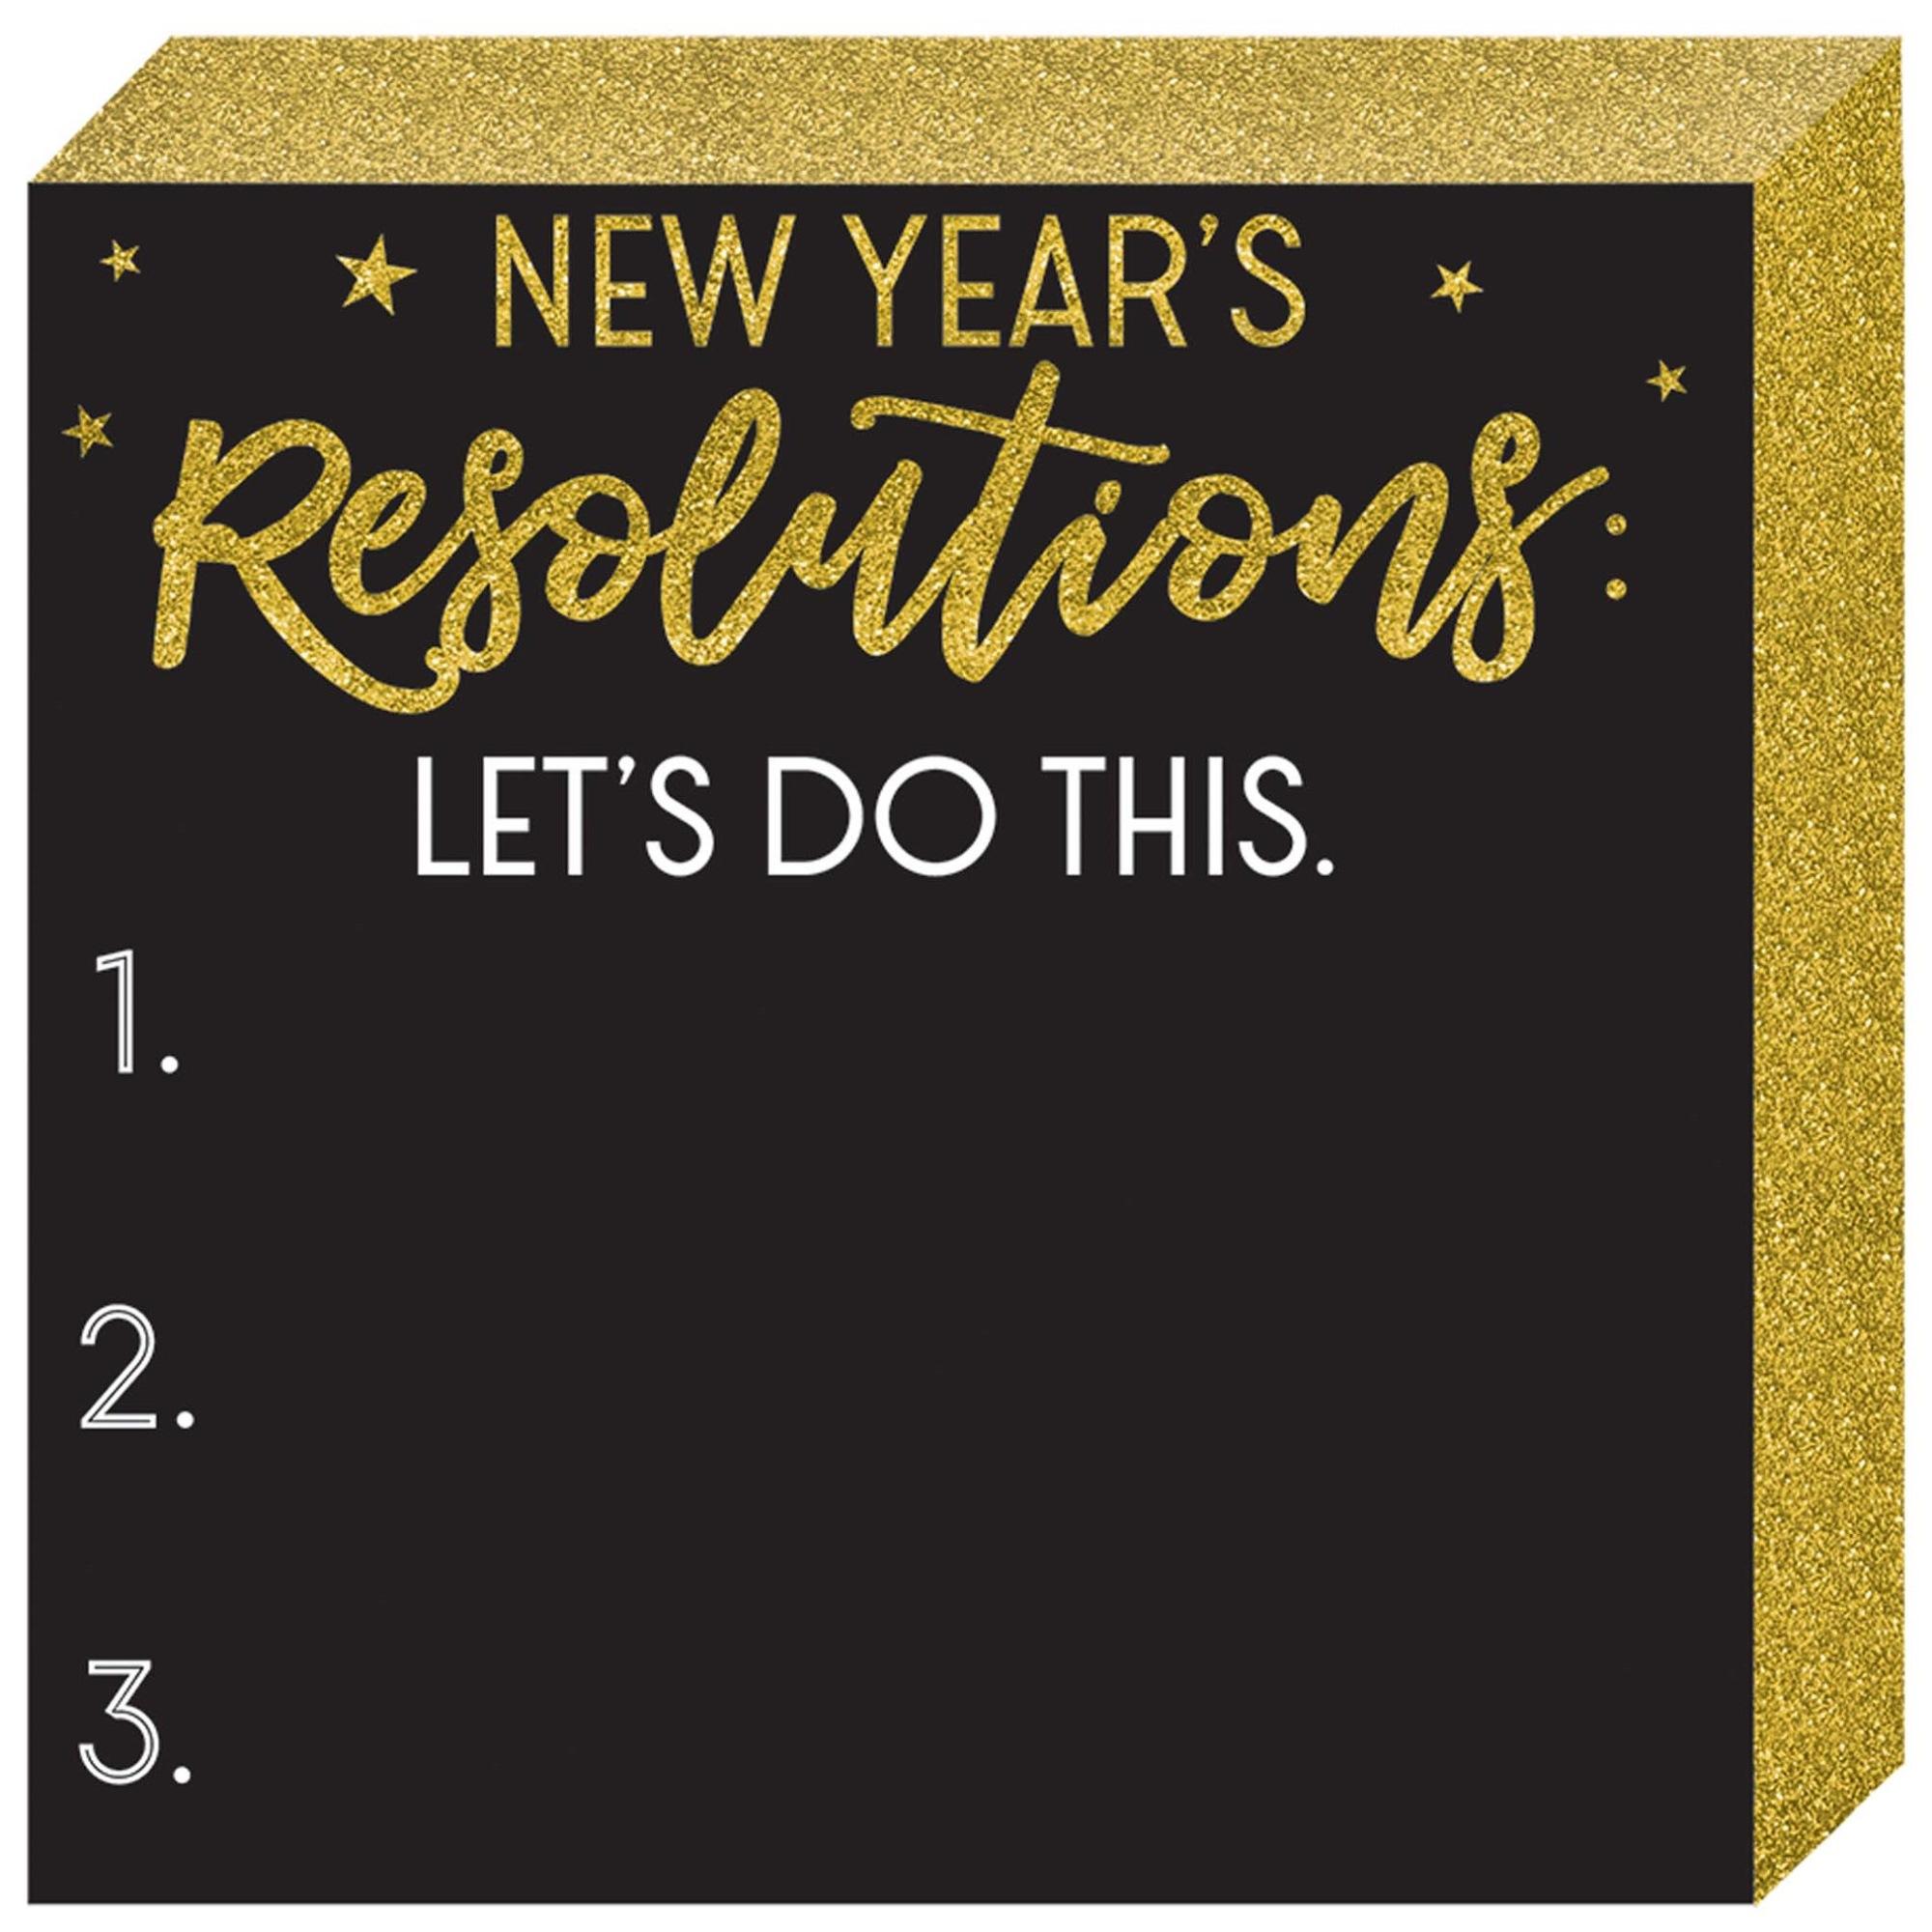 New Year Resolution Chalkboard Plaque Decorations - Party Centre